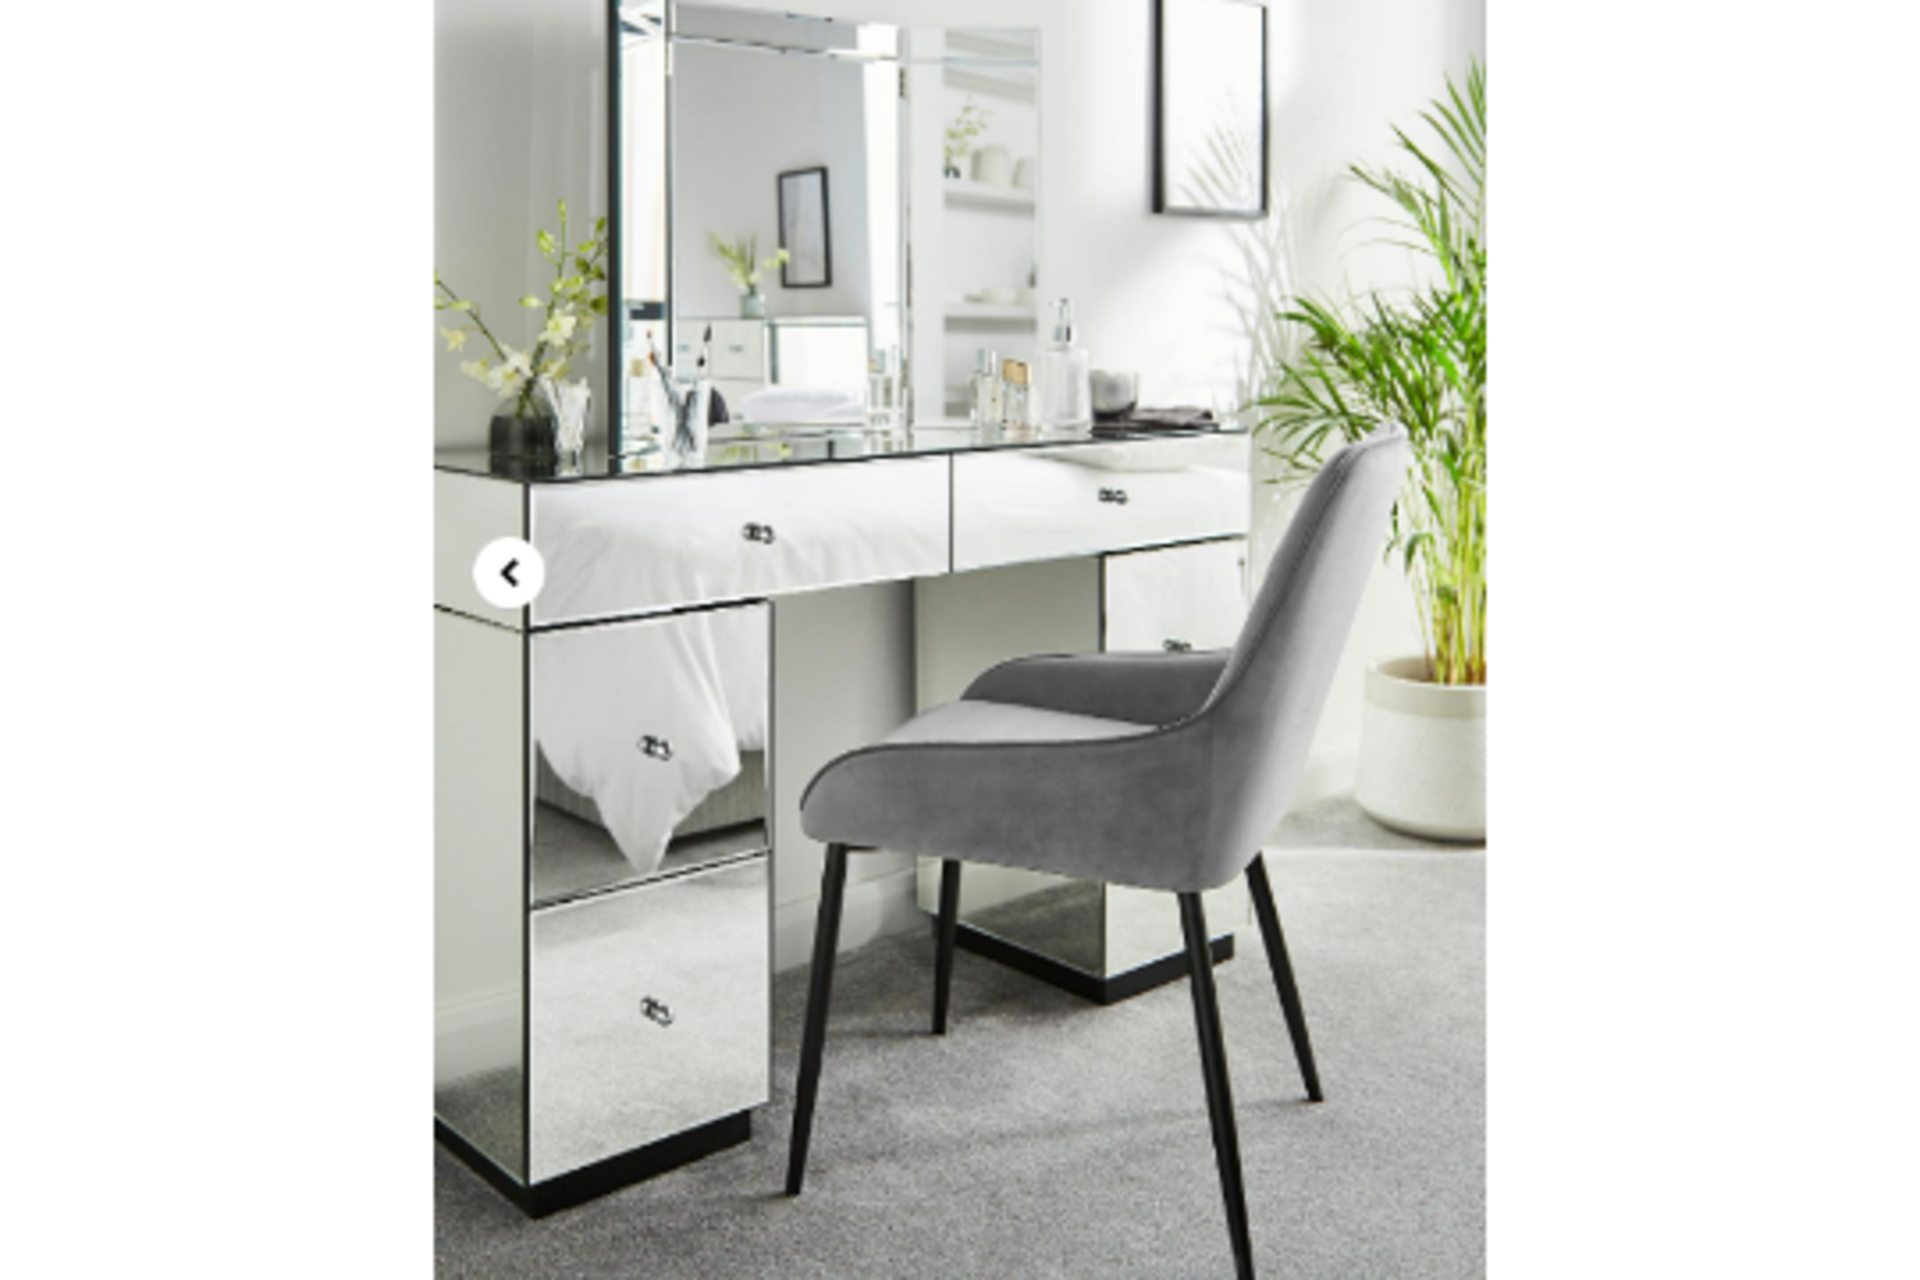 New & Boxed Luxury Deco Assembled Mirrored Dressing Table. RRP £599. The Mirage Mirrored Dressing - Image 2 of 4